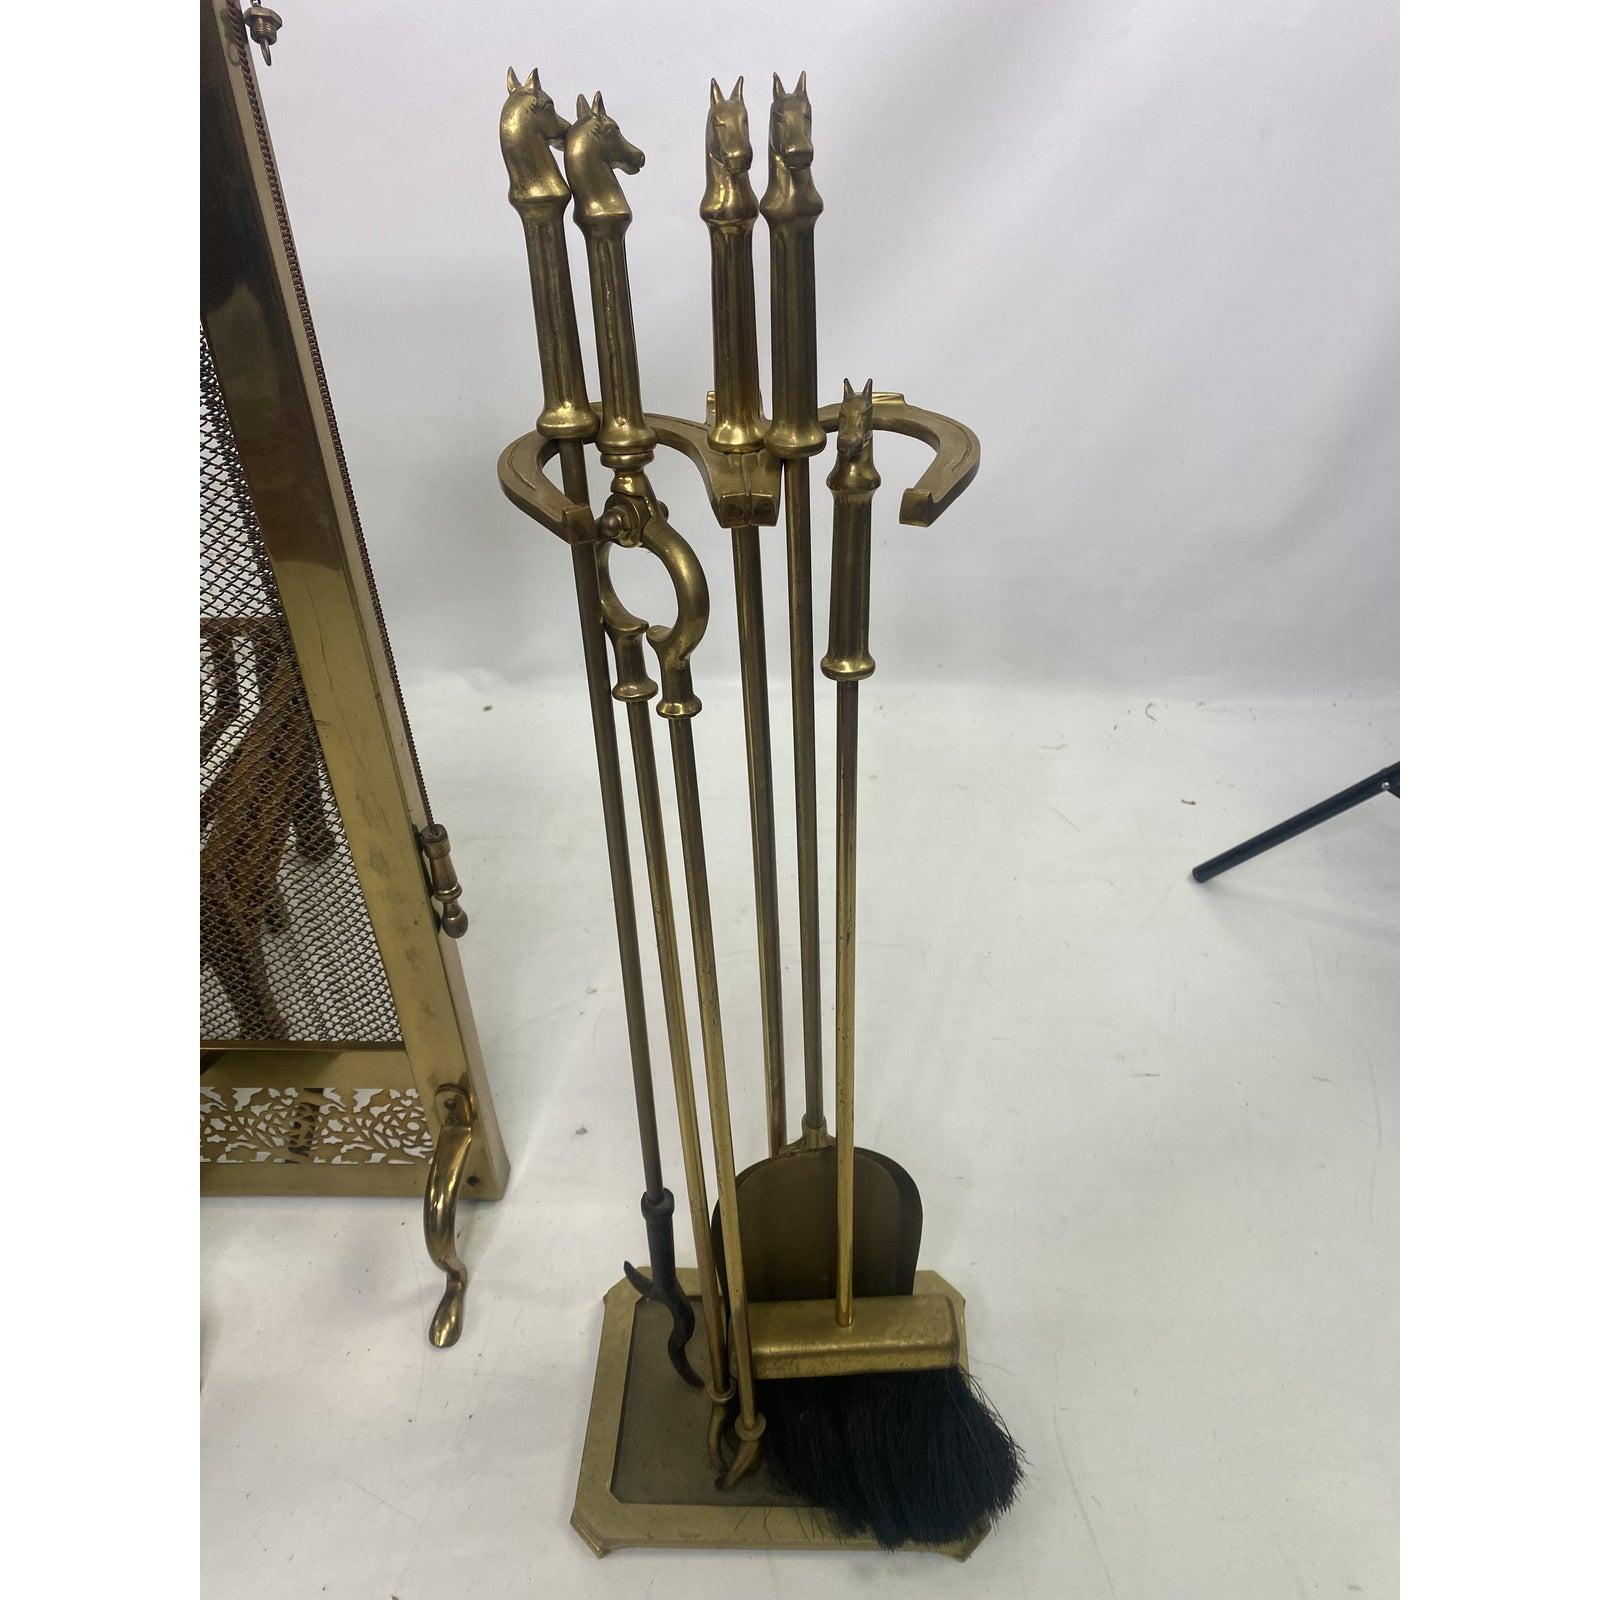 Vintage brass horse andirons, screen, log holder and tools - complete set

Measures: Screen: 31.25” H x 38” W x 5.5” D
Andirons 17.25” H x 4.25” W x 21” D
Log holder 8.5” H x 24” W x 15.25” D.